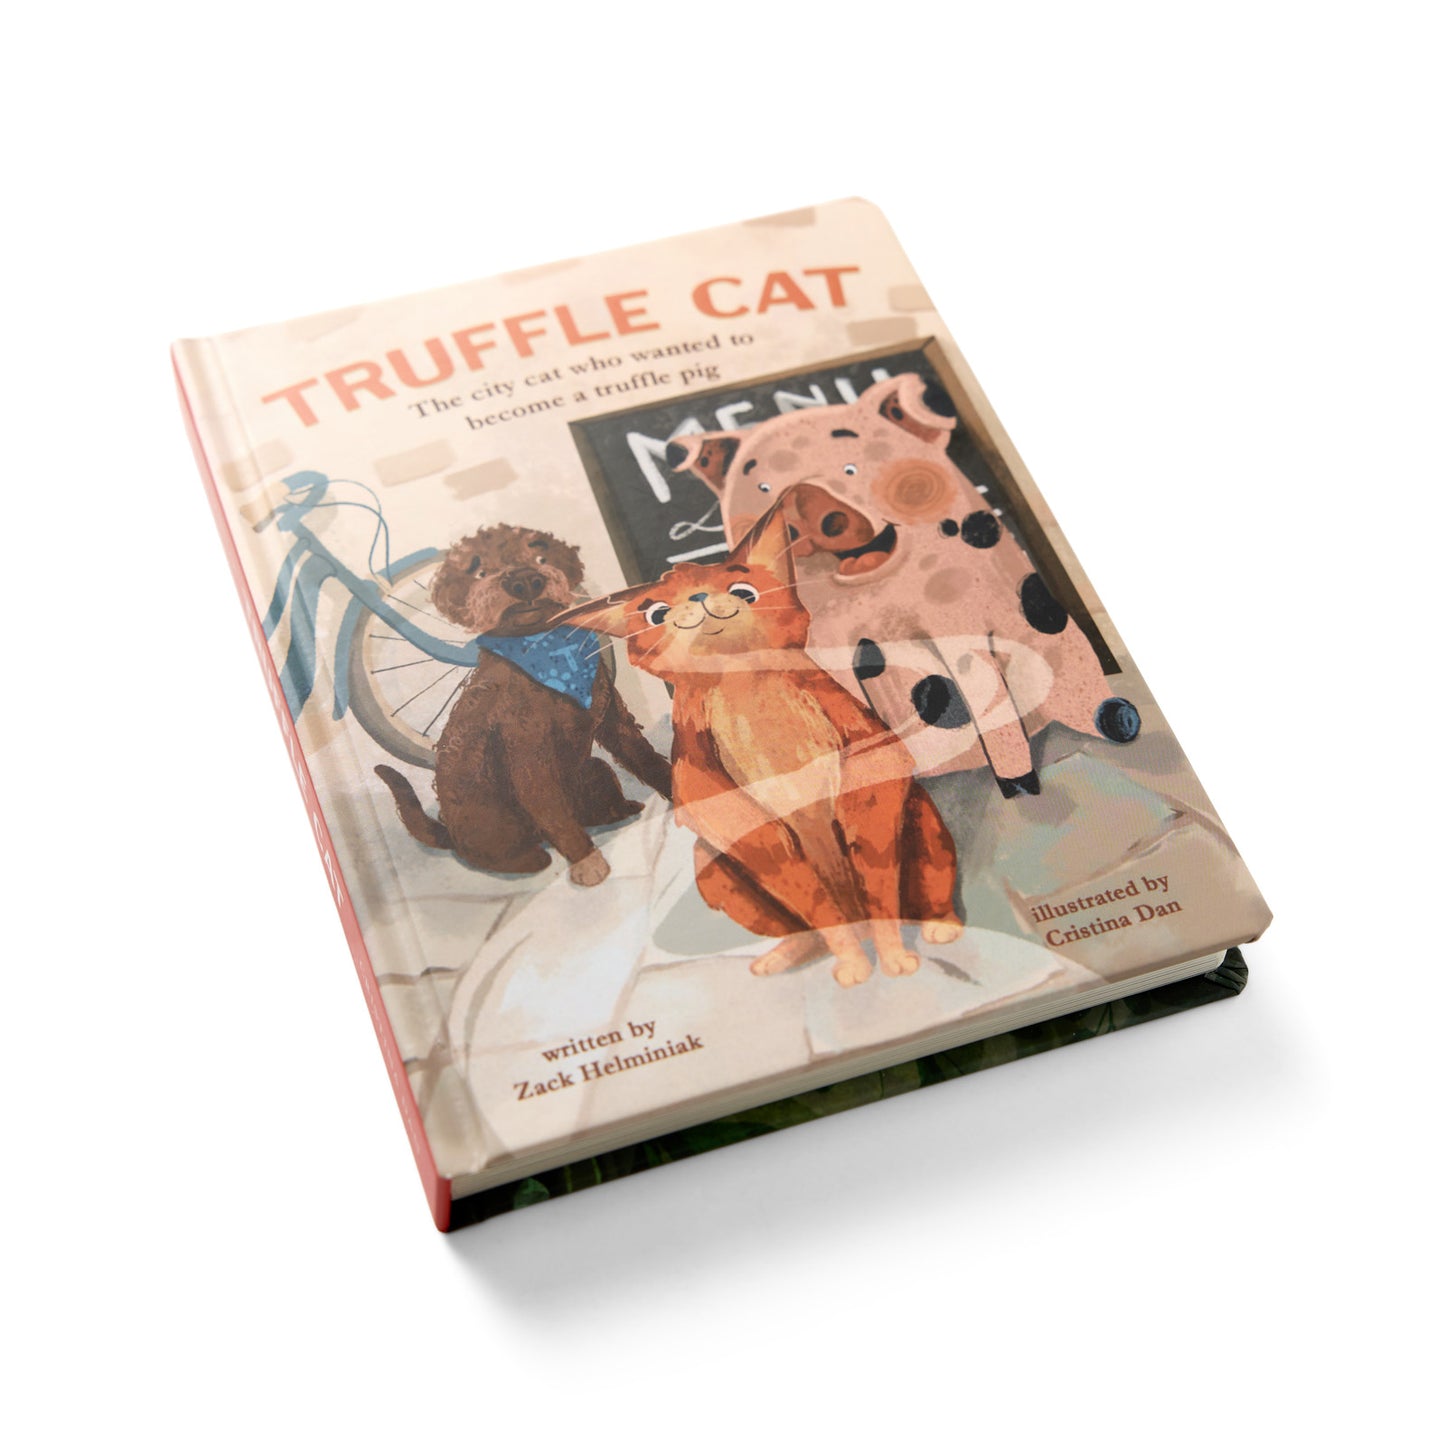 Truffle Cat Board Book (First Edition)